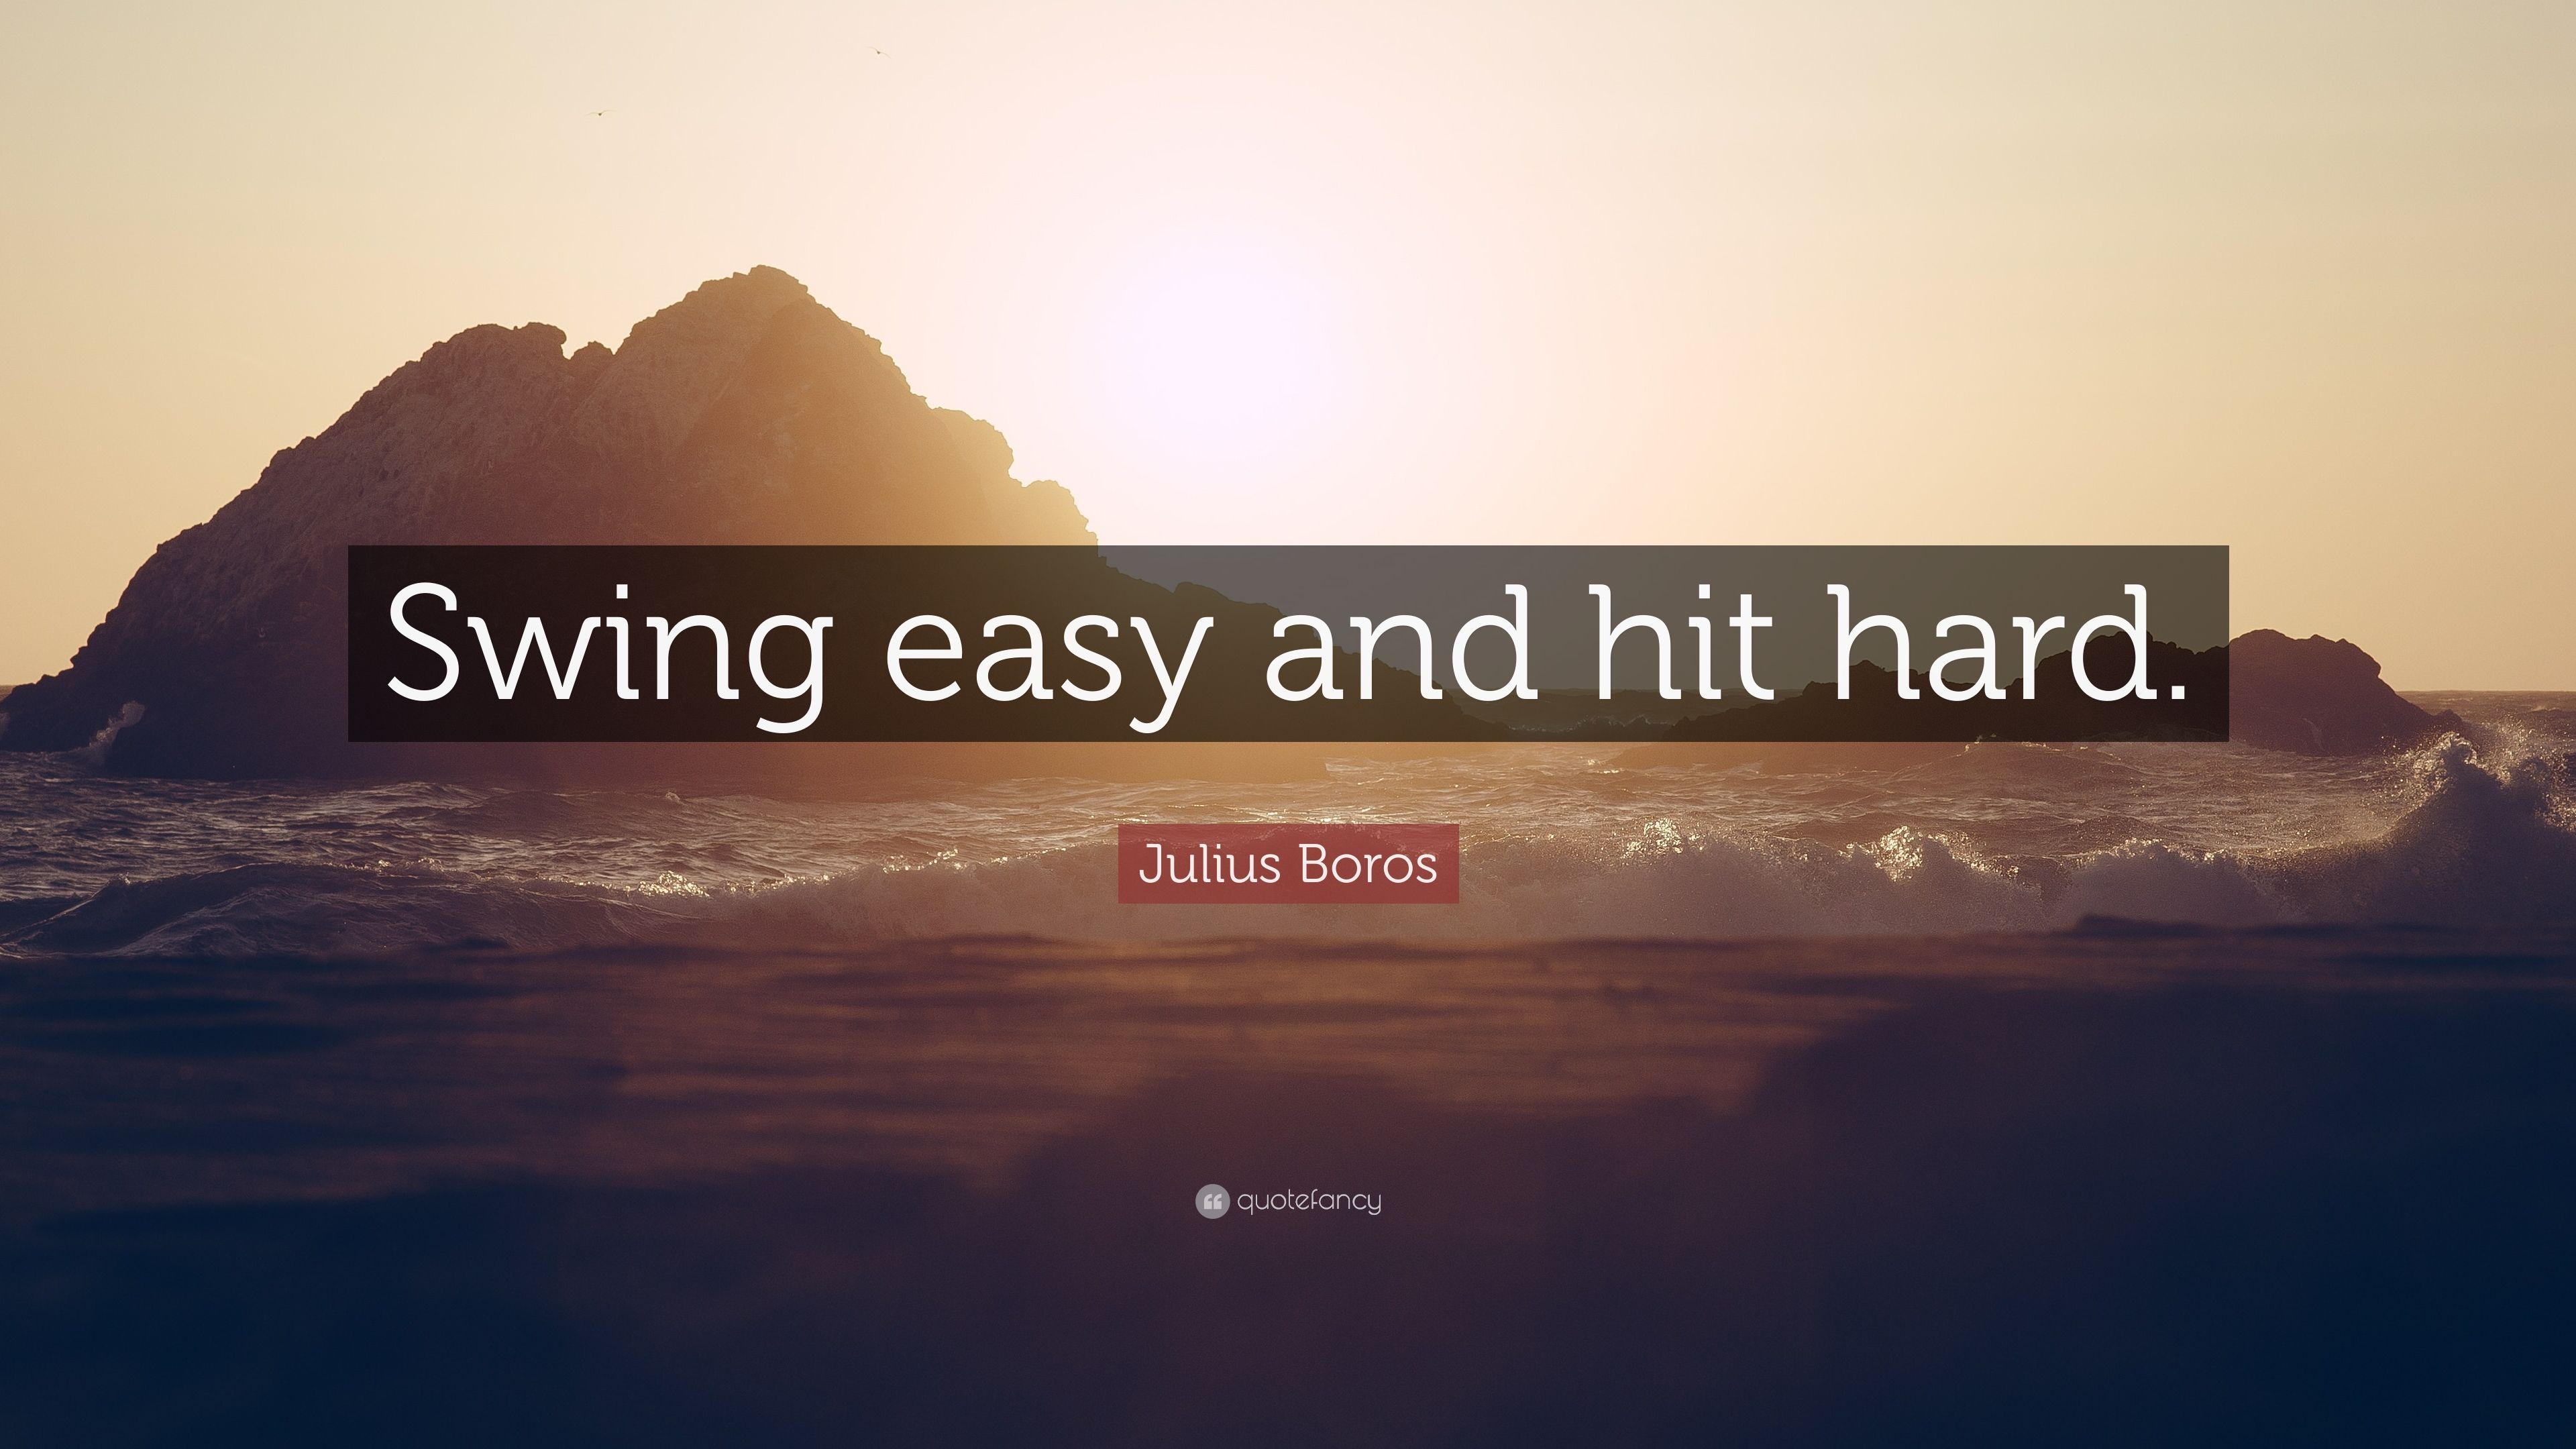 Julius Boros Quote Robbins Life Is About Moments, Download